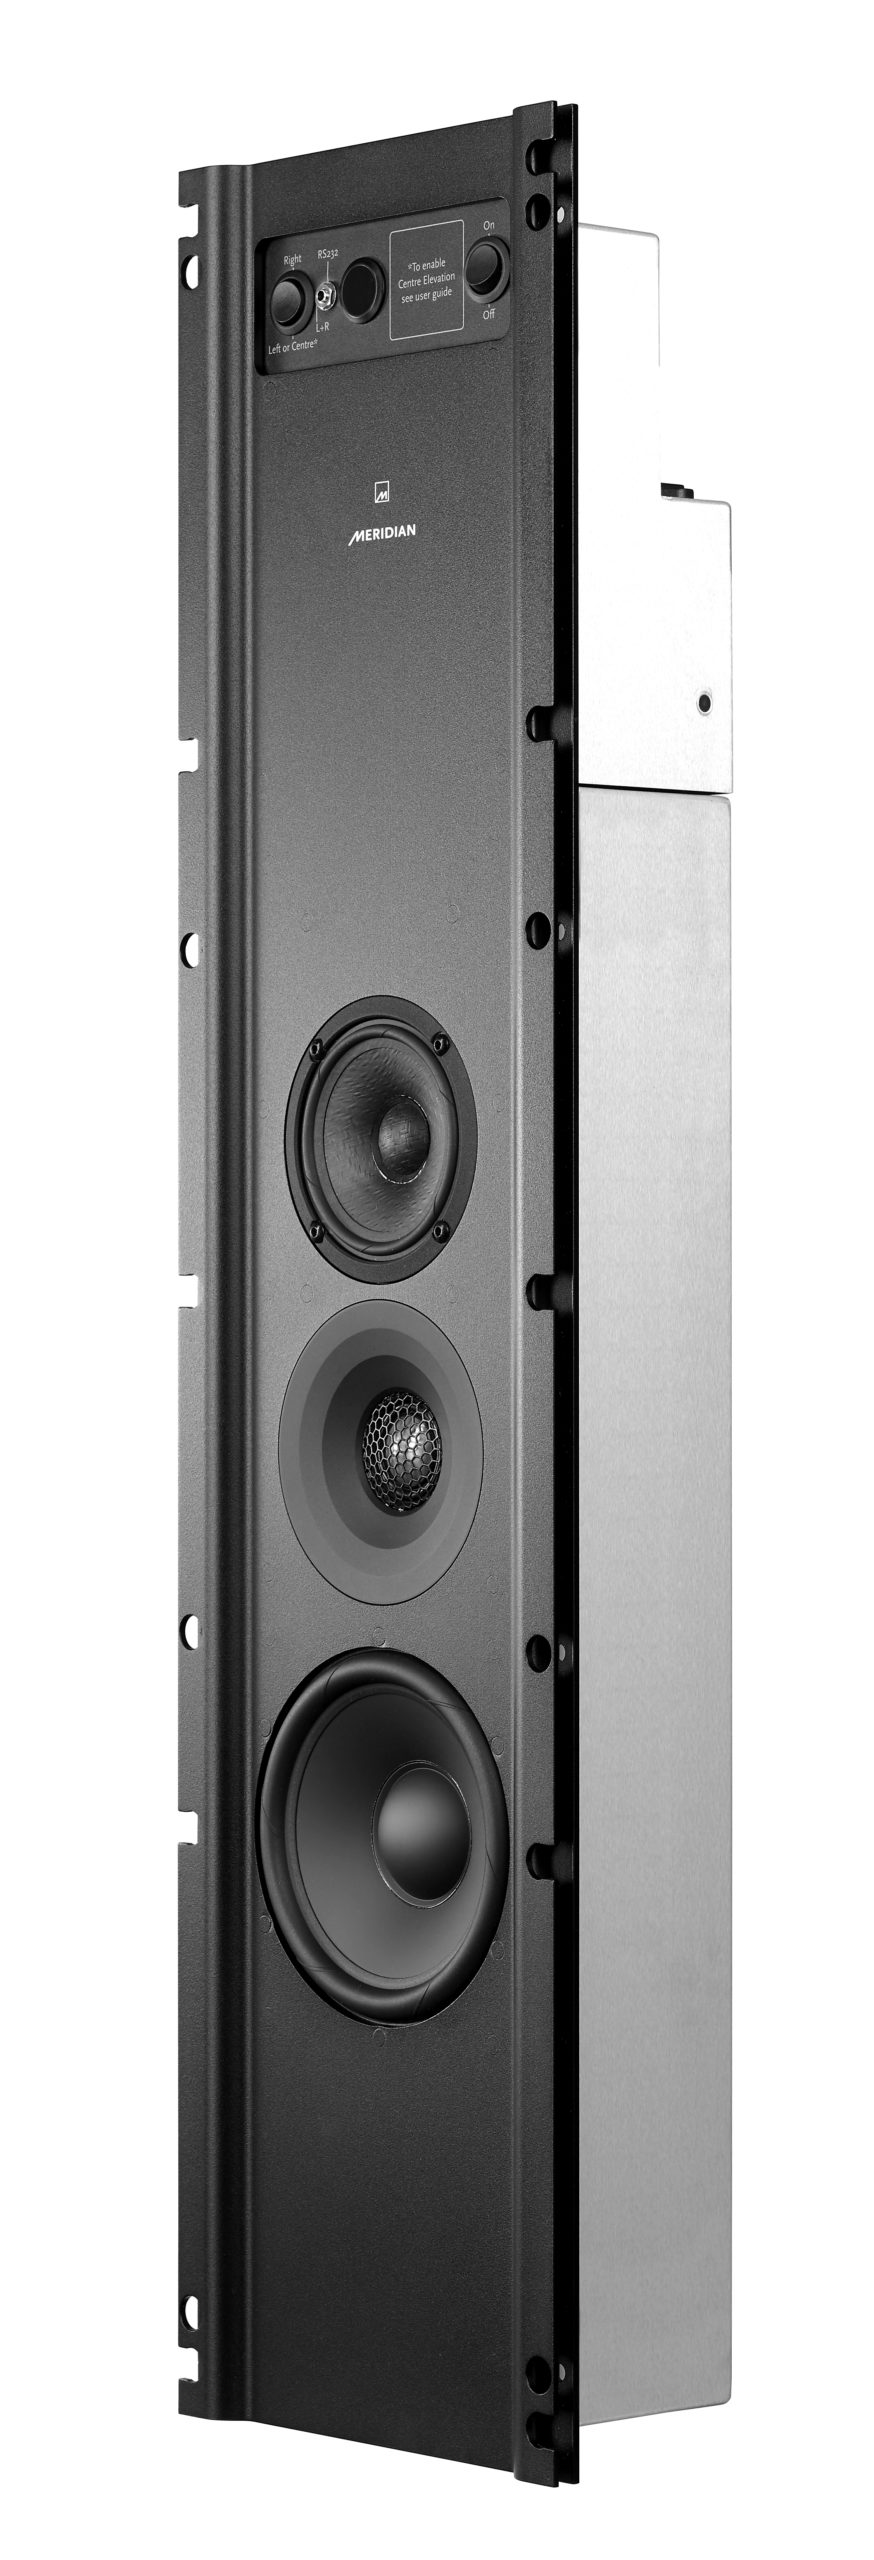 Meridian Audio Expands Reference Range with DSP730 Loudspeaker